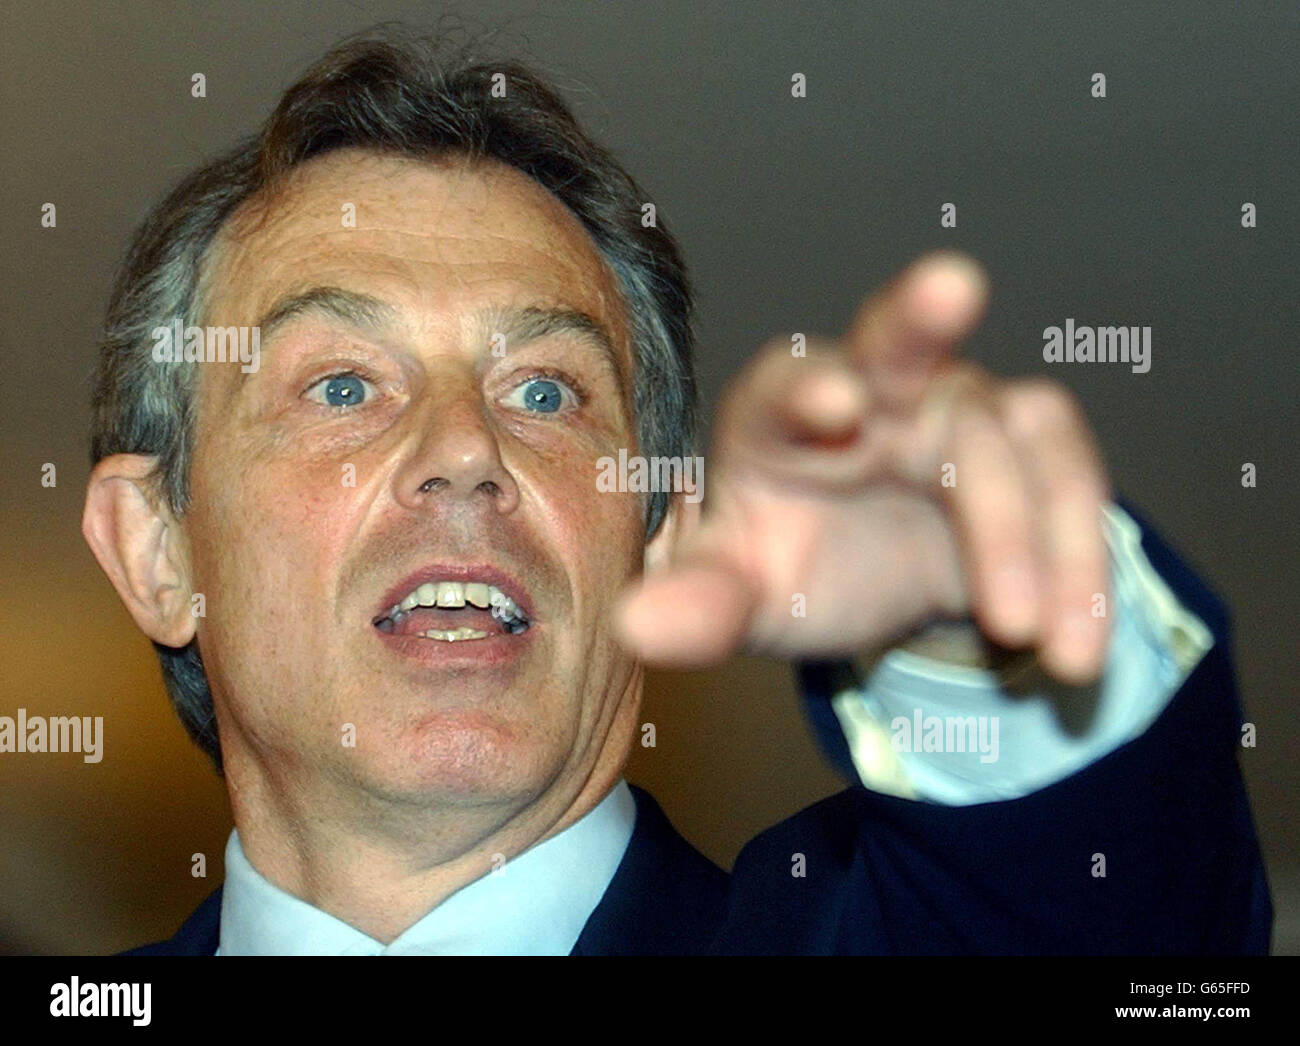 Prime Minister Tony Blair speaks at a Downing Street Press Conference. Blair said Monday that the Iraqi leader Saddam Hussein can still peacefully end the standoff over weapons of mass destruction, * ... but warned that he will be disarmed by force if he does not. Stock Photo